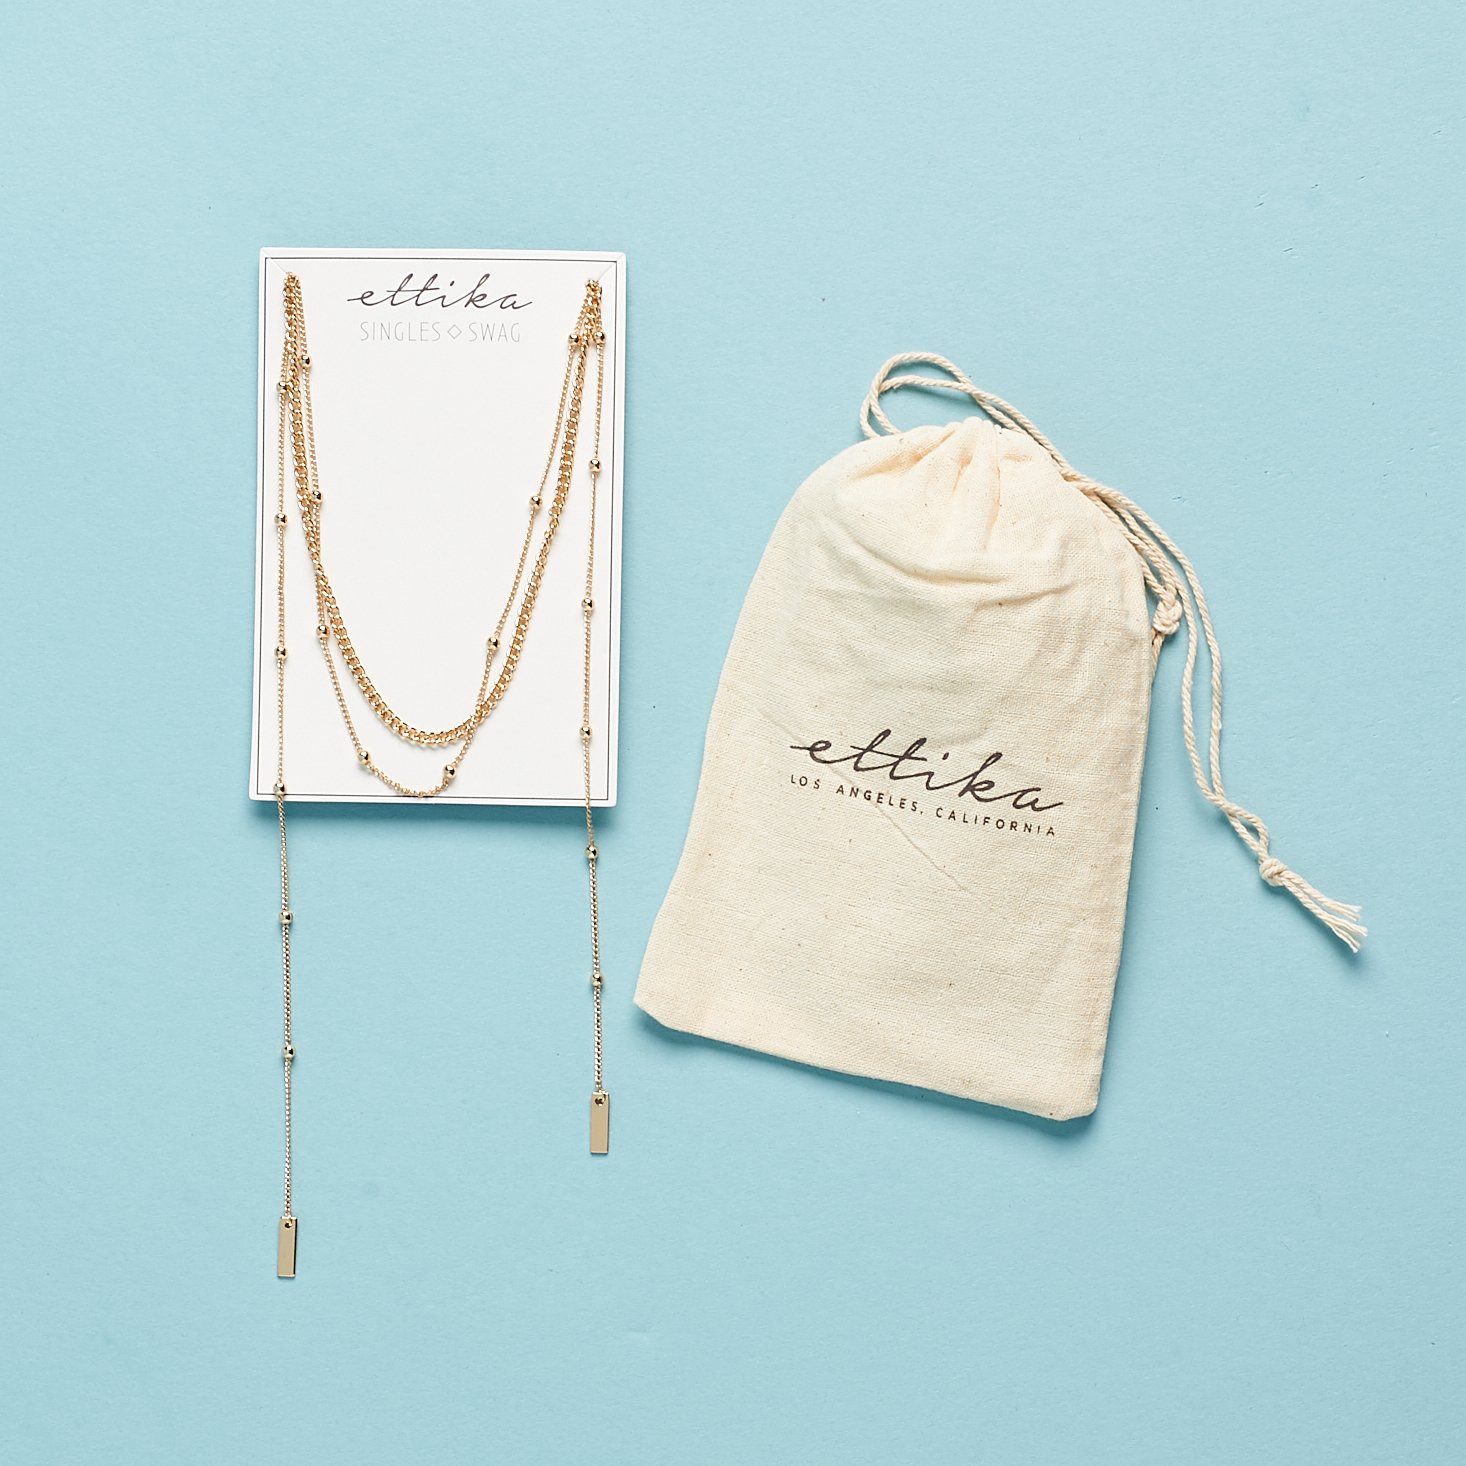 Ettika That New Feeling Layered Necklace on card with pouch